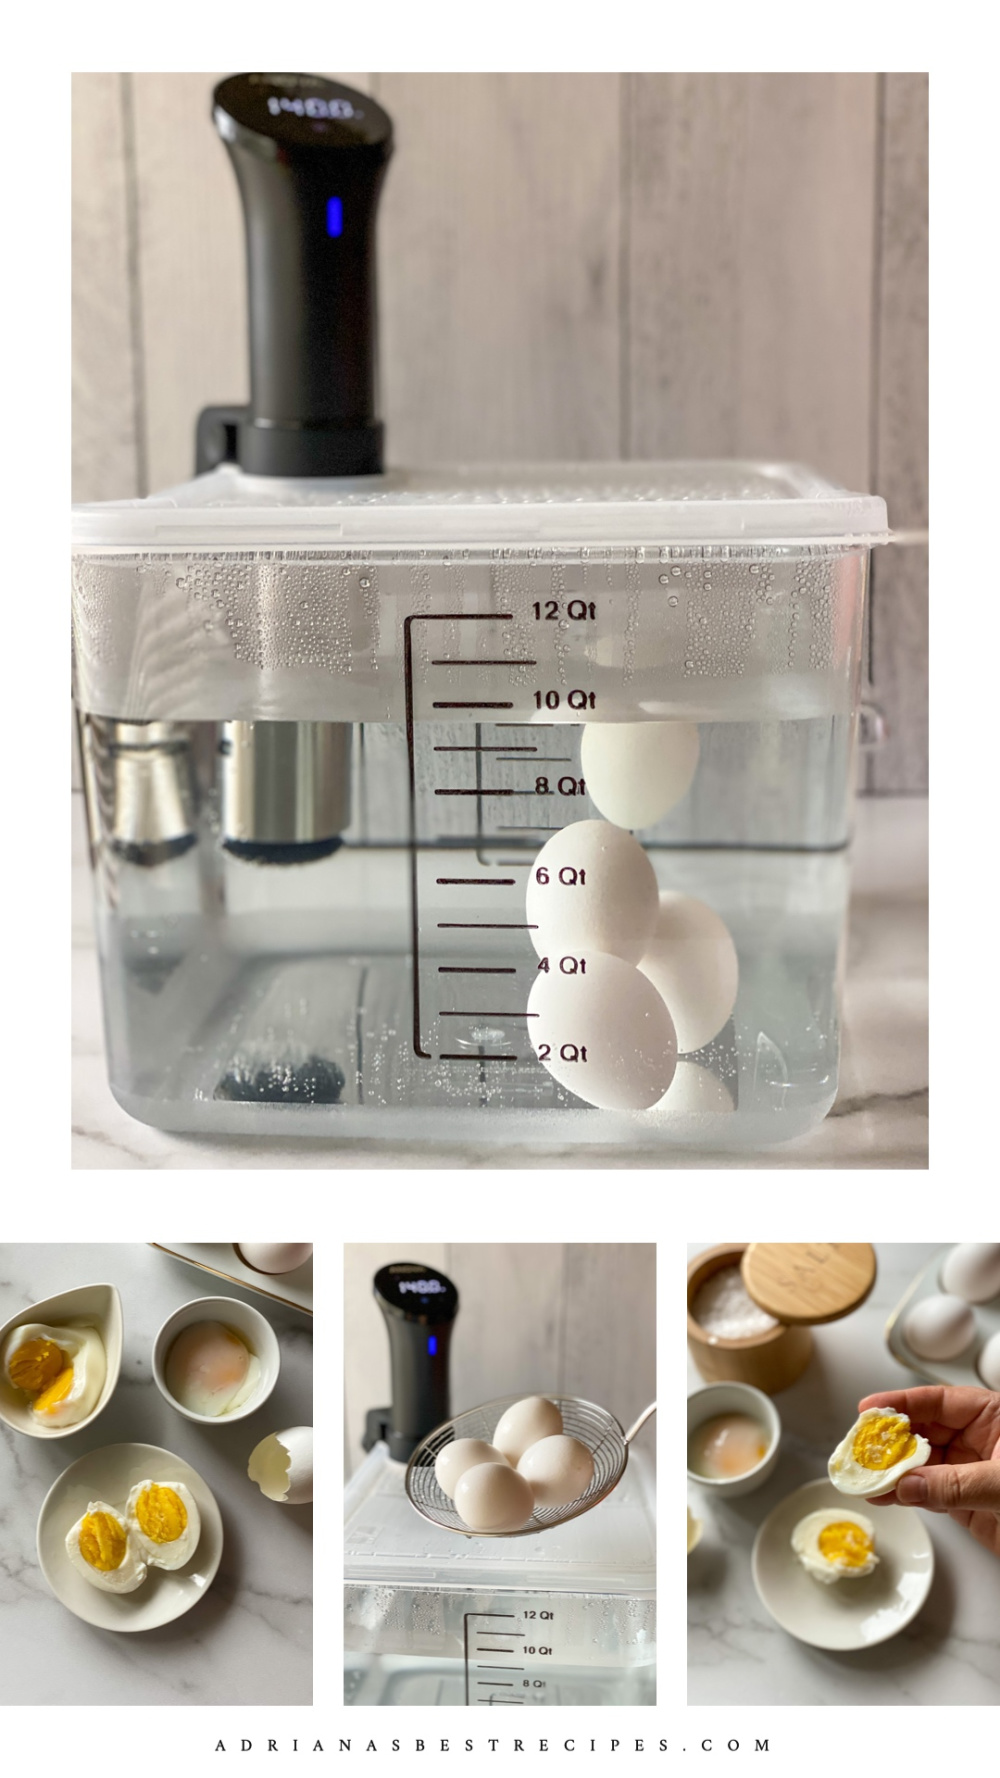 A collage of images showing the technique on how to cook eggs using an immersion circulator